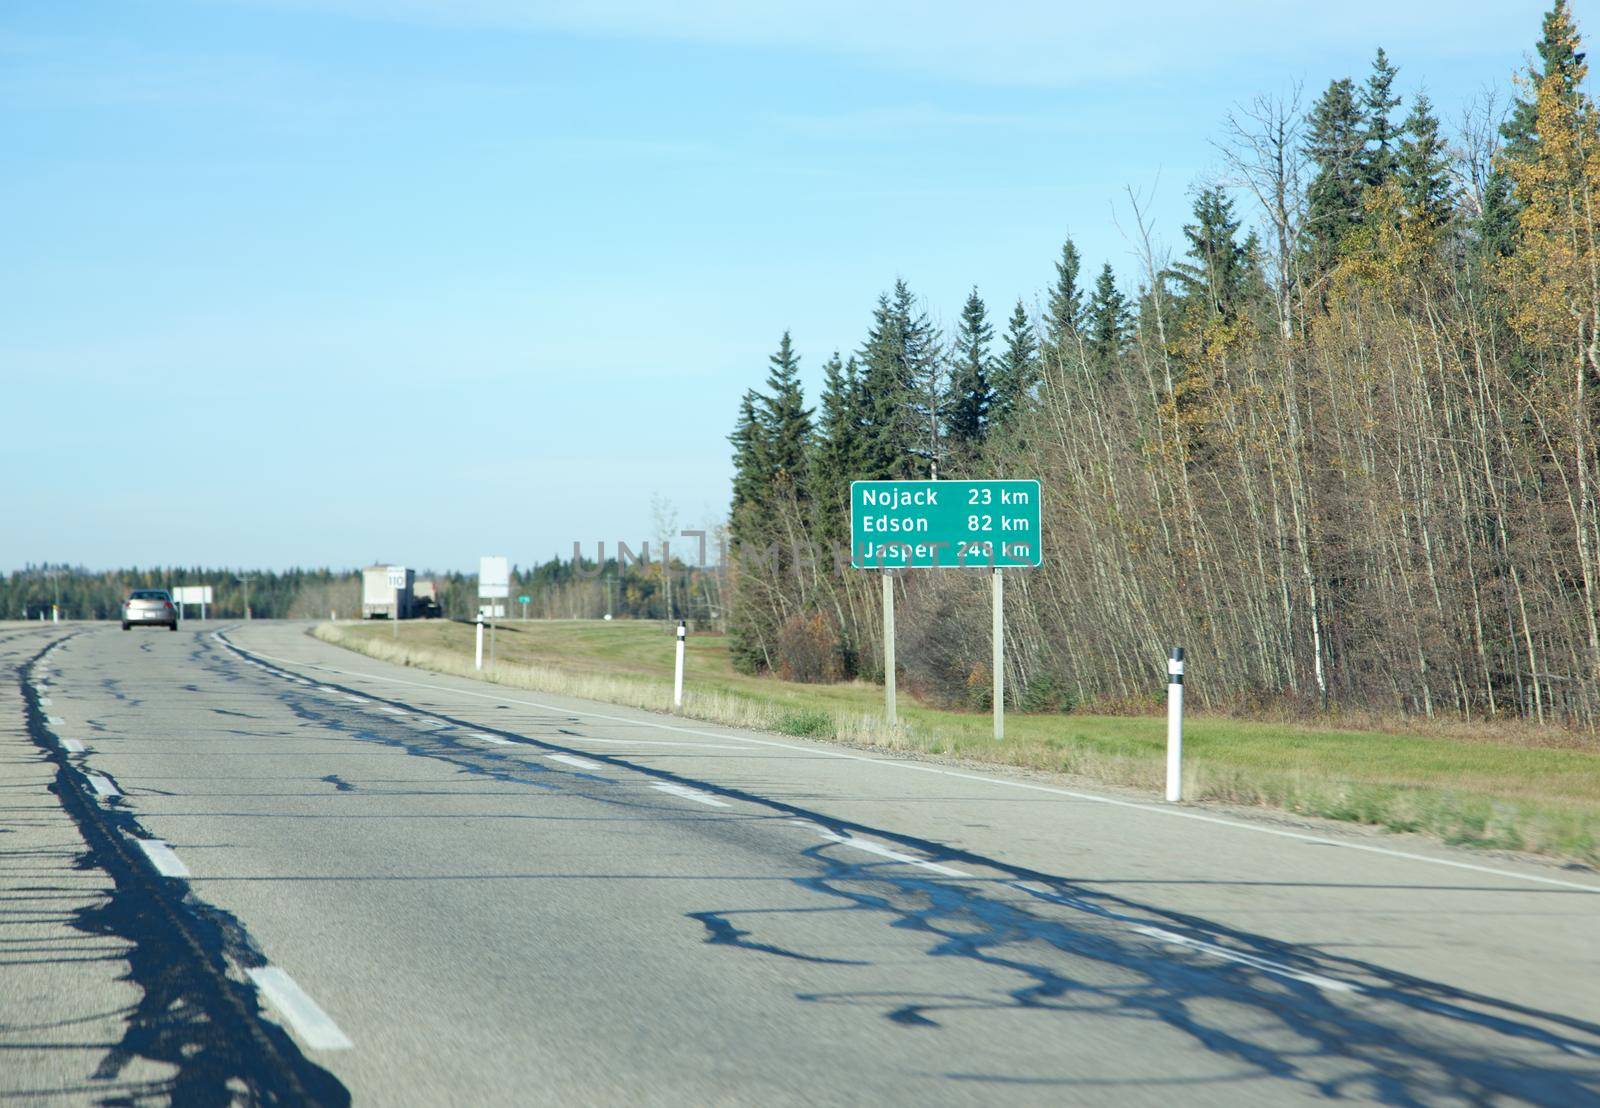 a green highway sign on the trans canada in alberta showing kilometres til jasper, edson and nojack